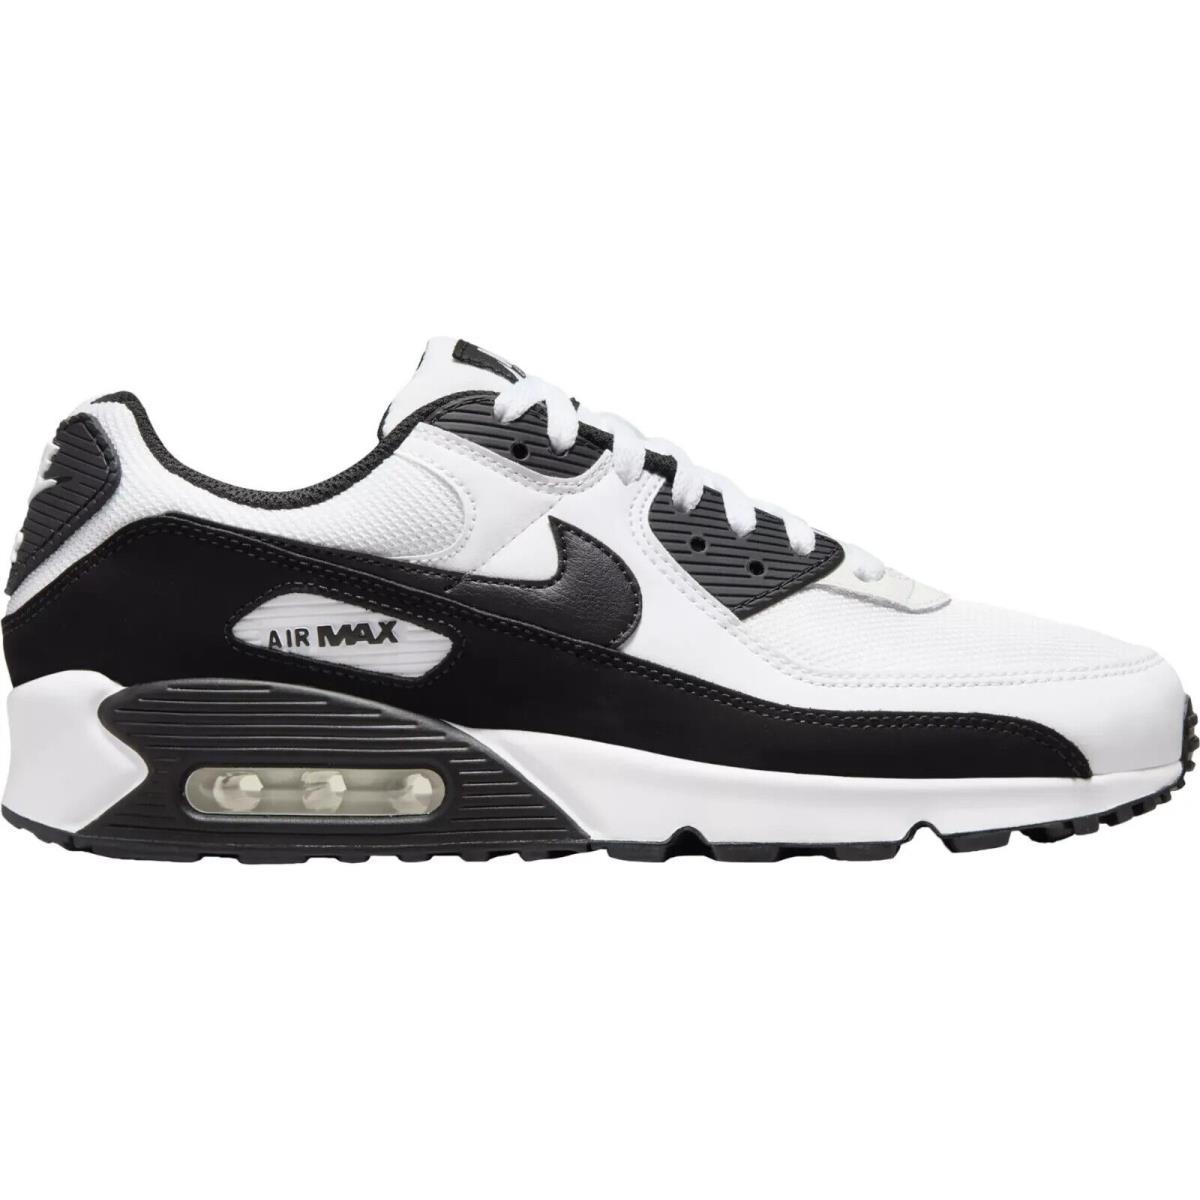 Nike Air Max 90 Men`s Casual Shoes All Colors US Sizes 7-14 Bestseller White/White/Black